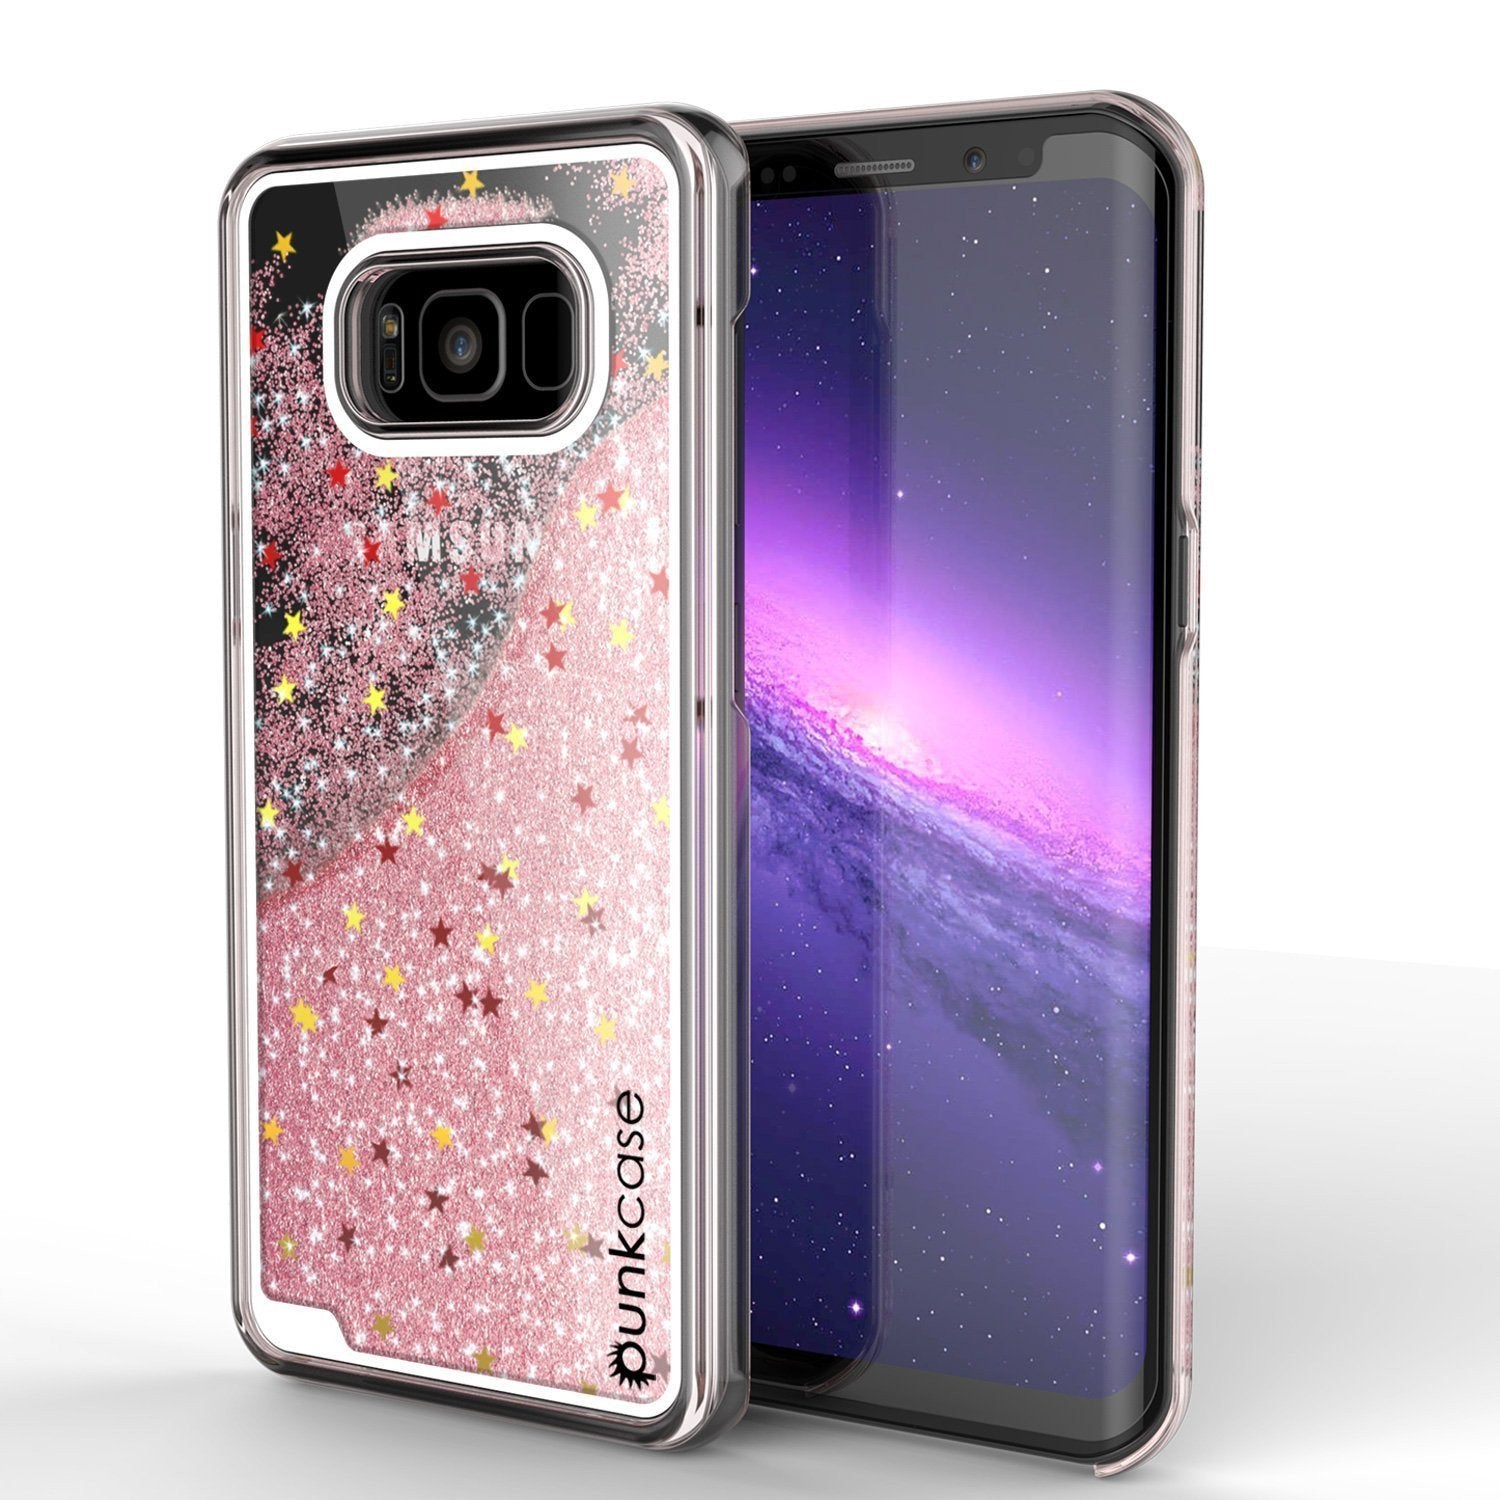 Galaxy S8 Case, Punkcase Liquid Rose Series Protective Glitter Cover